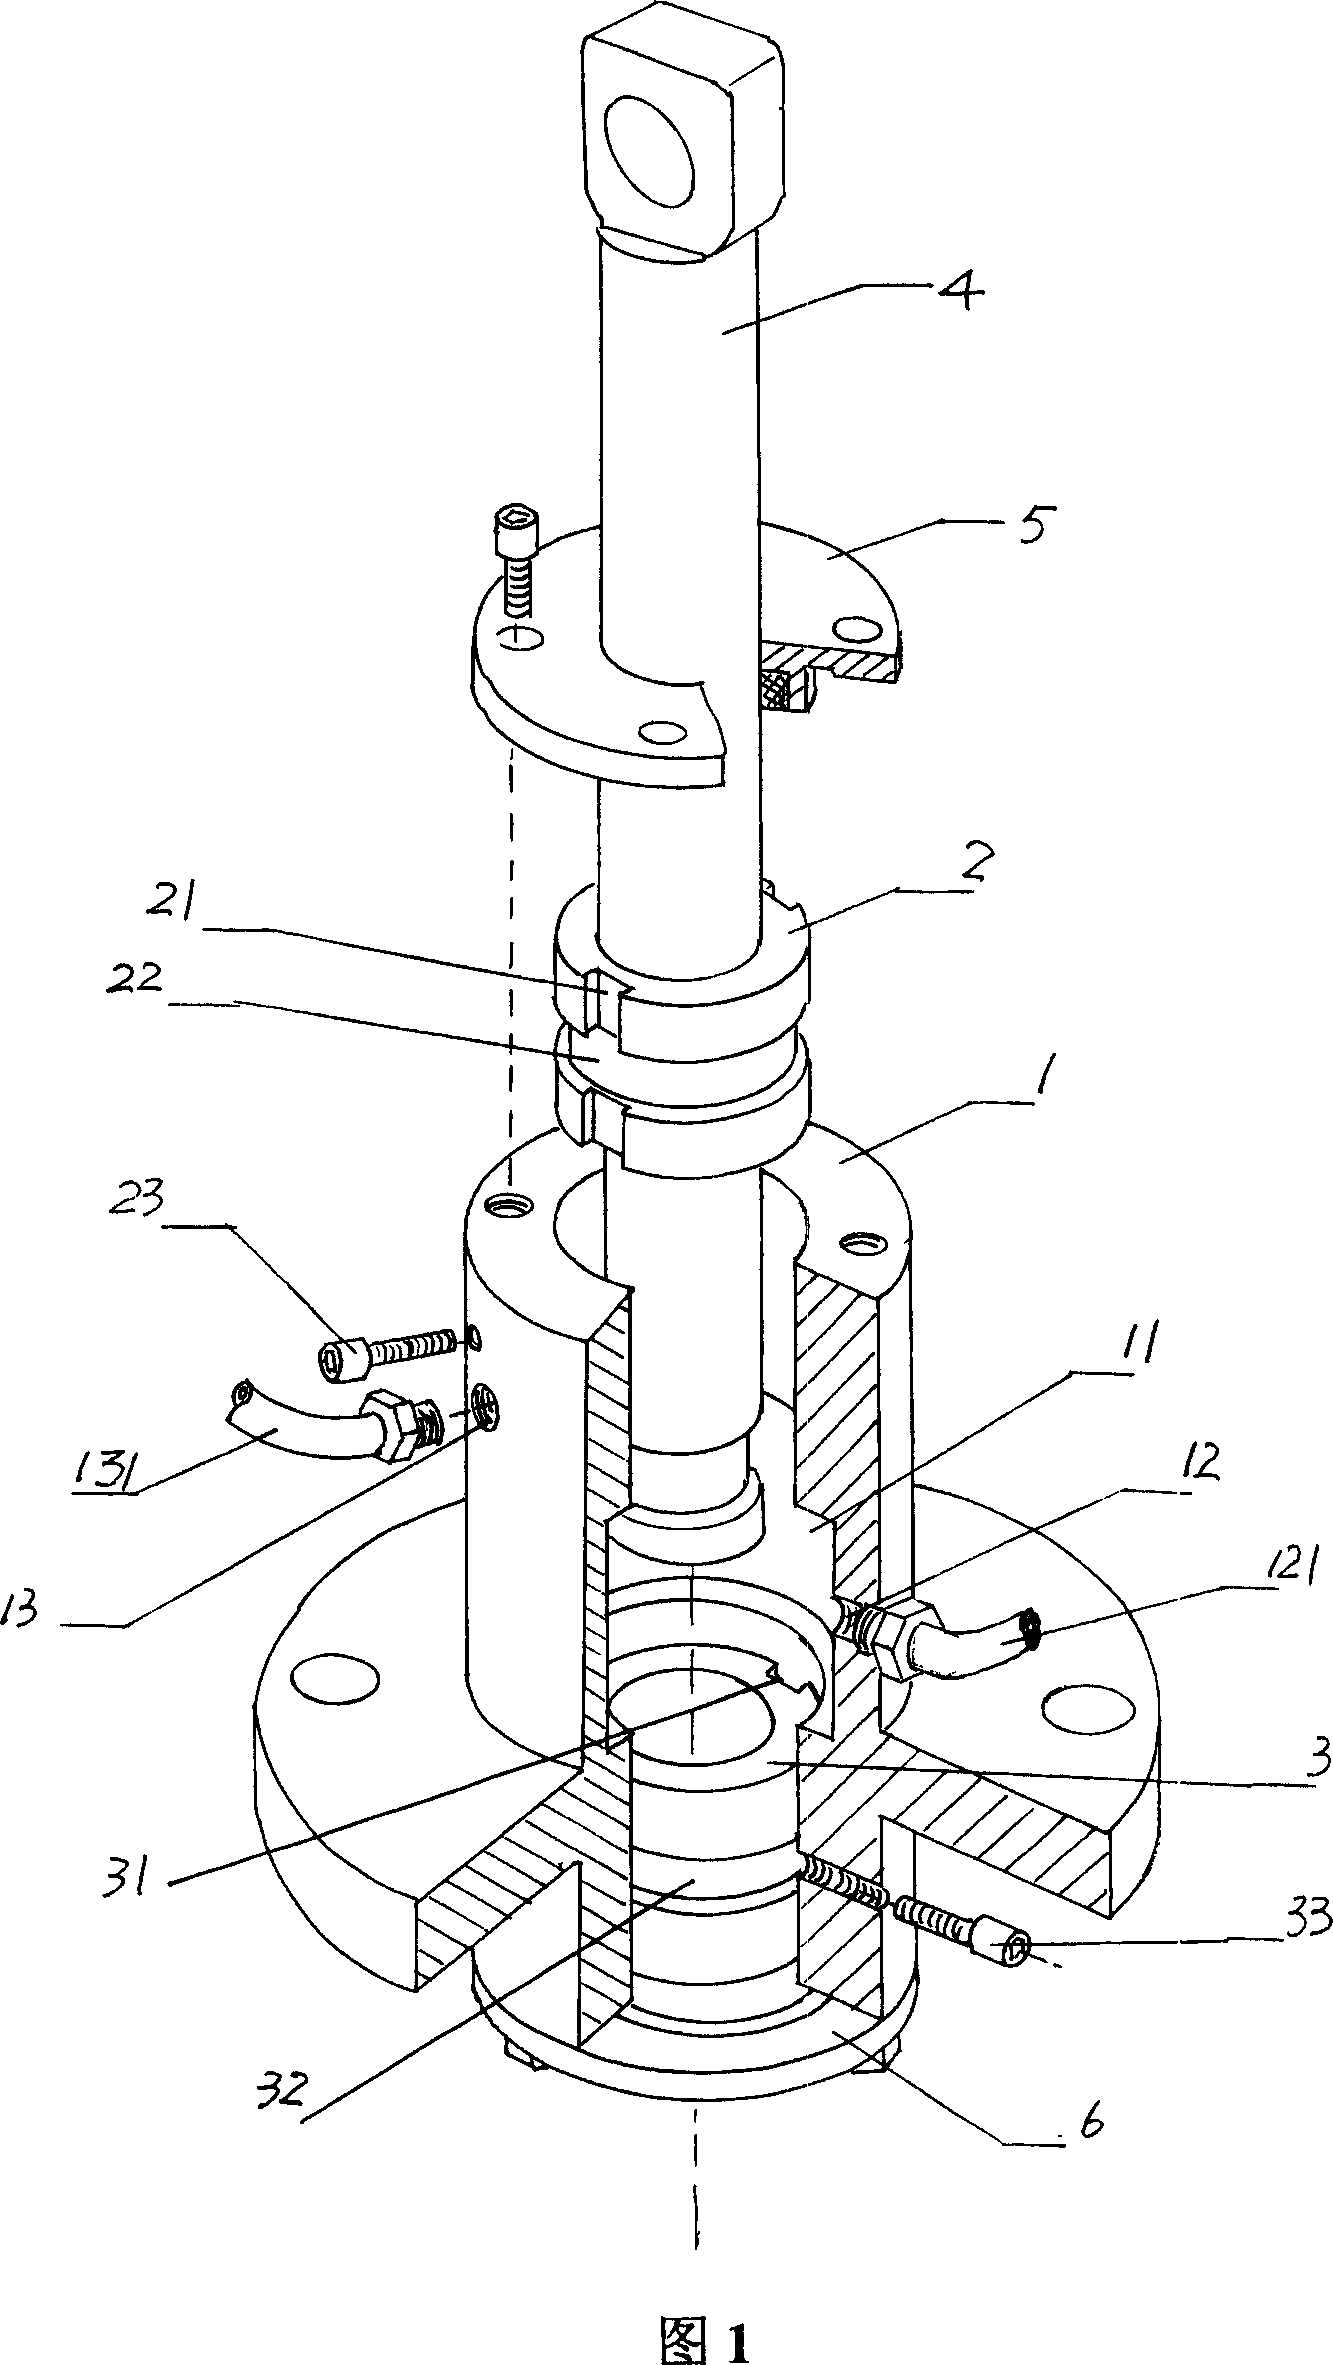 Reciprocating guide mechanism for needle loom